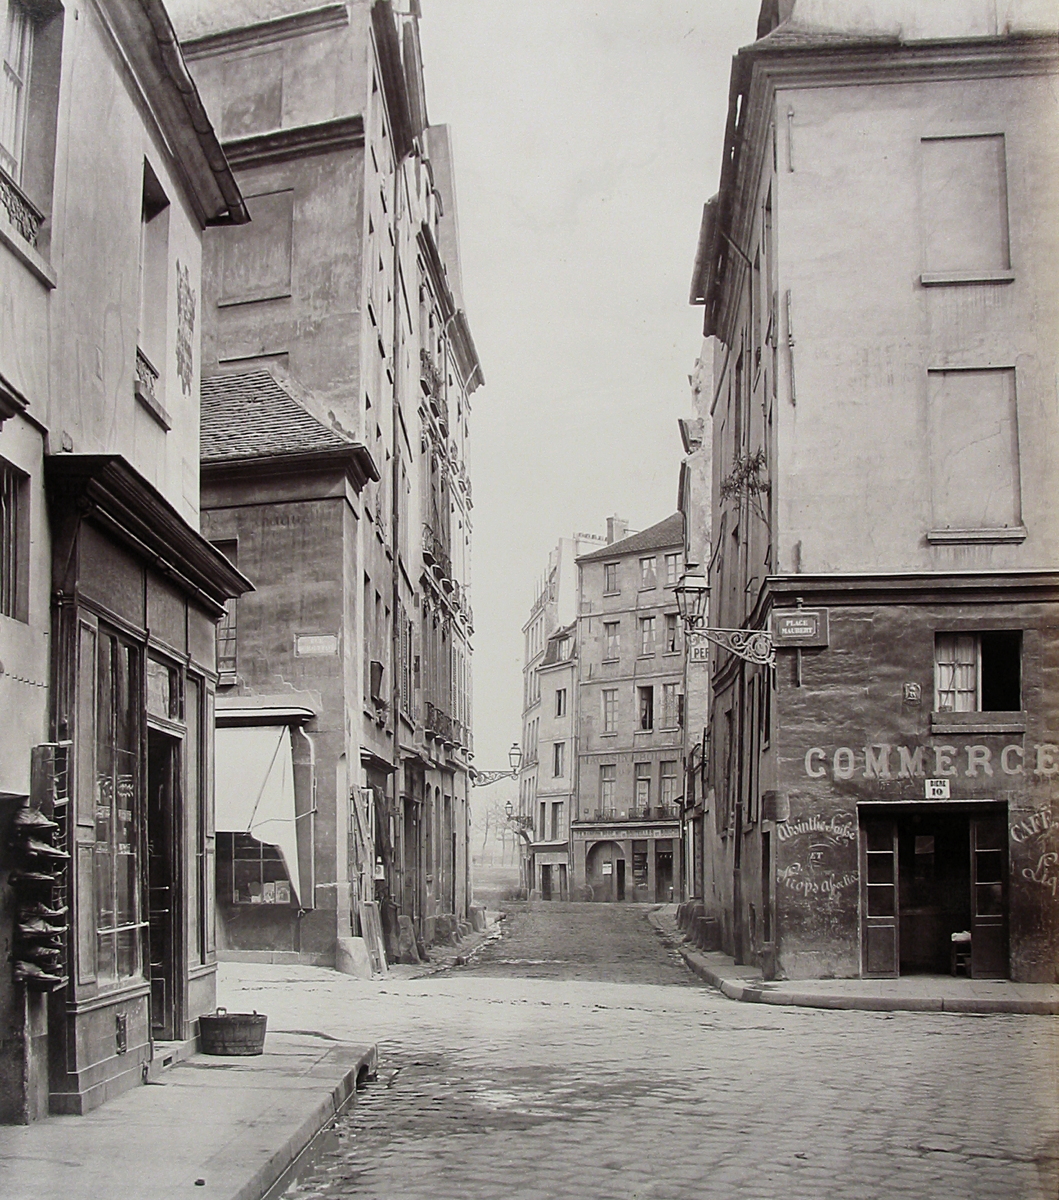 Charles Isaacs | Exhibit | Charles Marville: The Streets of Old Paris ...